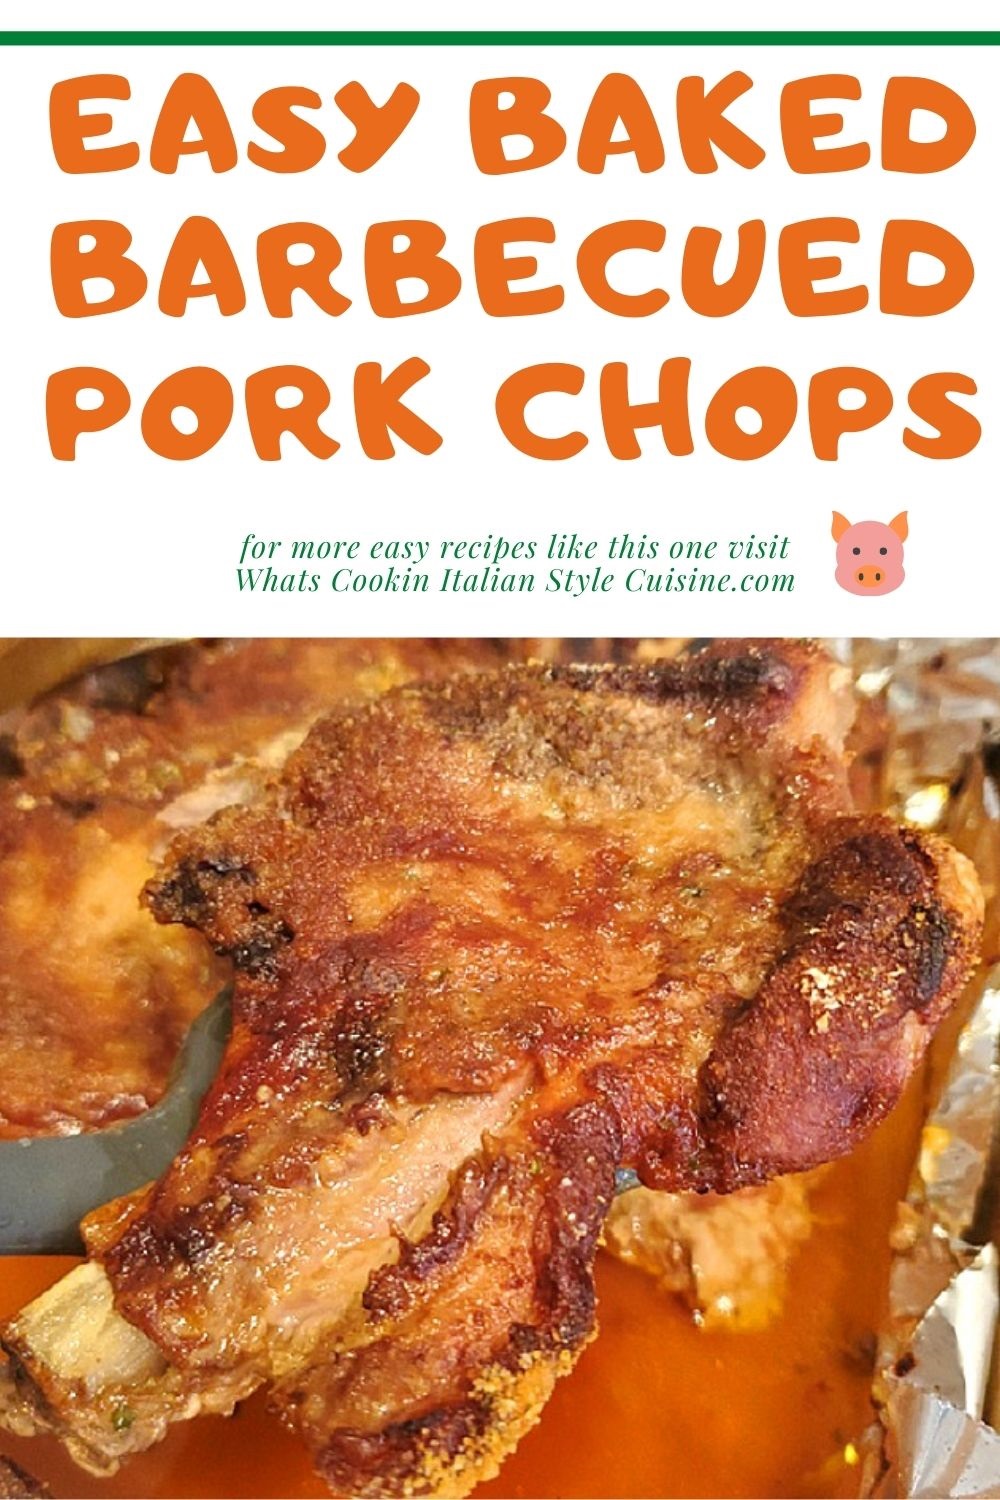 Easy Baked Barbecued Pork Chops What S Cookin Italian Style Cuisine